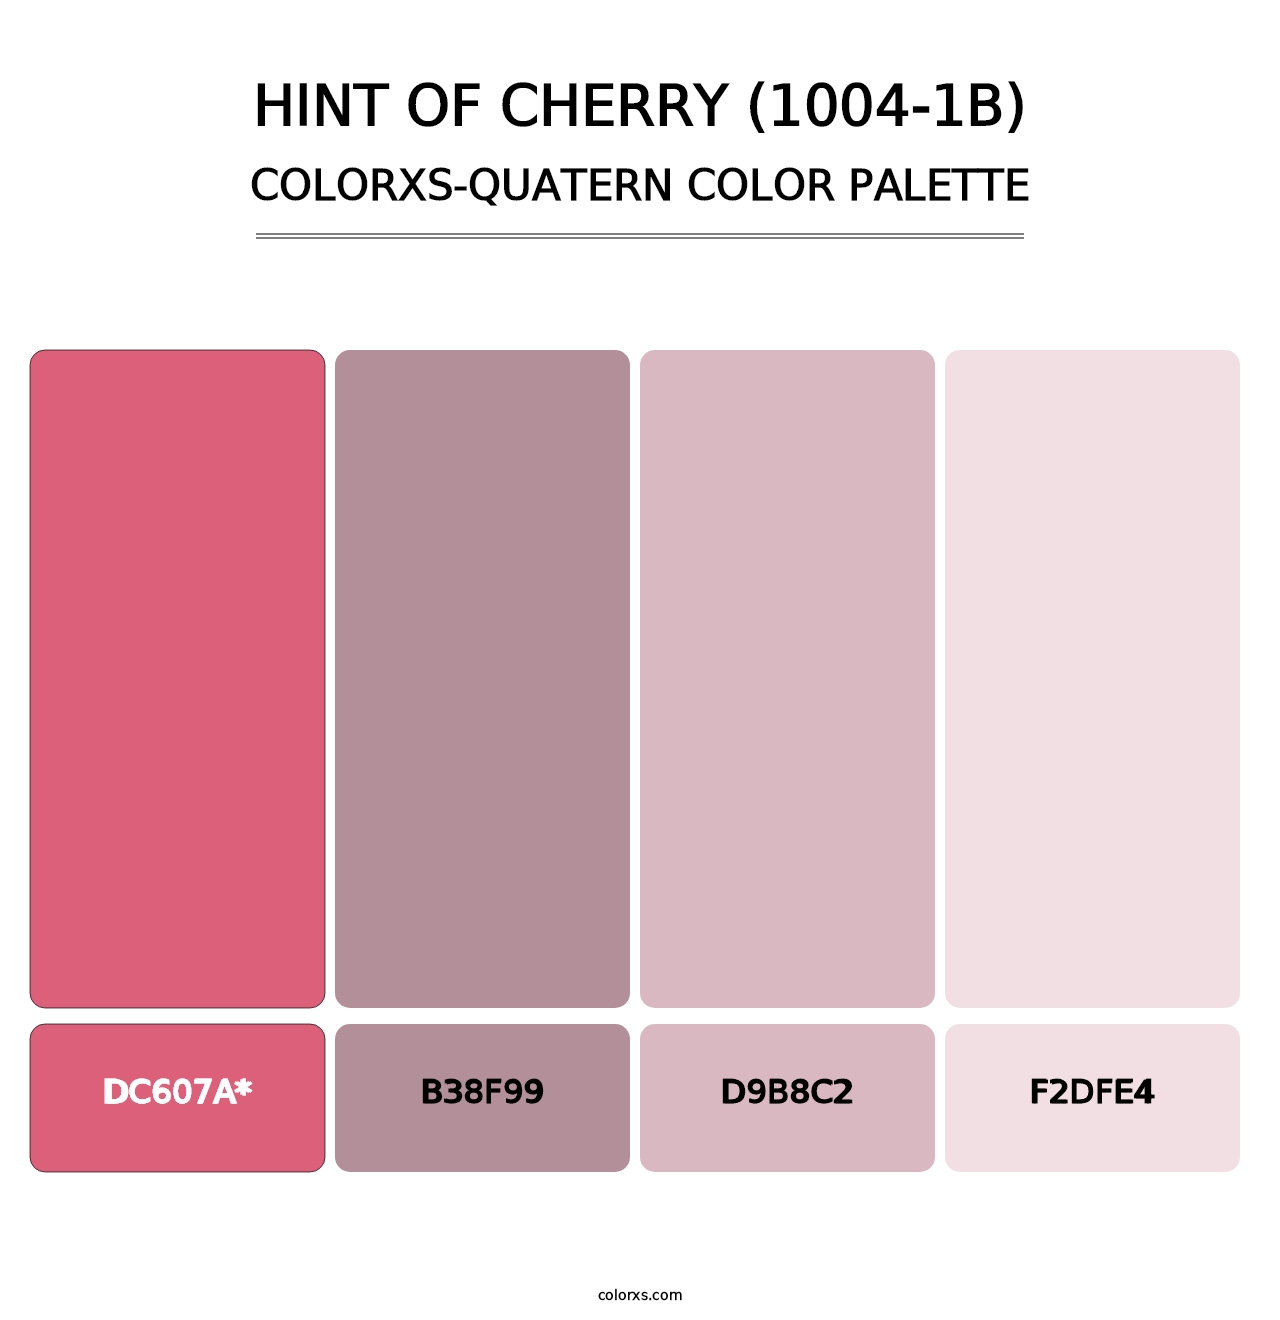 Hint of Cherry (1004-1B) - Colorxs Quatern Palette